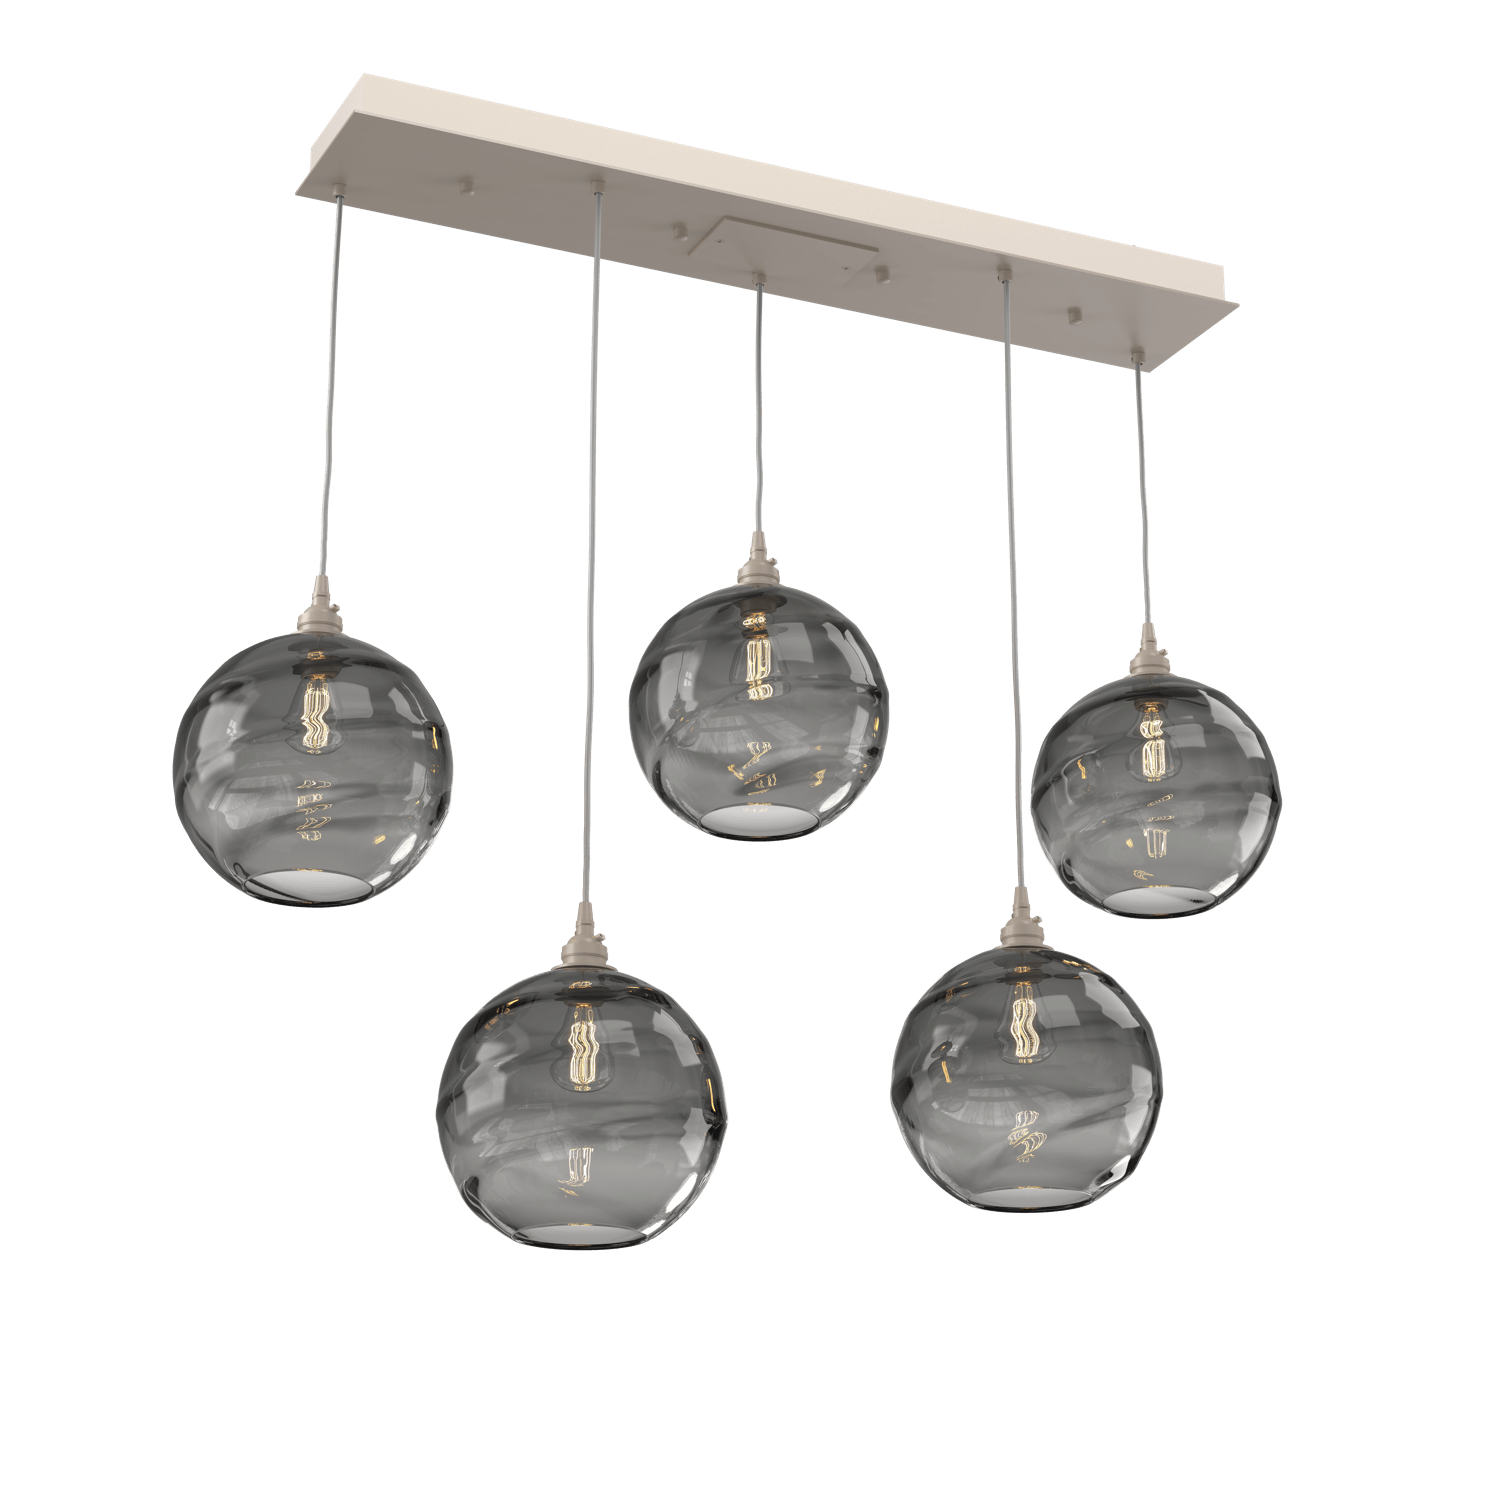 PLB0047-05-BS-OS-Hammerton-Studio-Optic-Blown-Glass-Terra-5-light-linear-pendant-chandelier-with-metallic-beige-silver-finish-and-optic-smoke-blown-glass-shades-and-incandescent-lamping